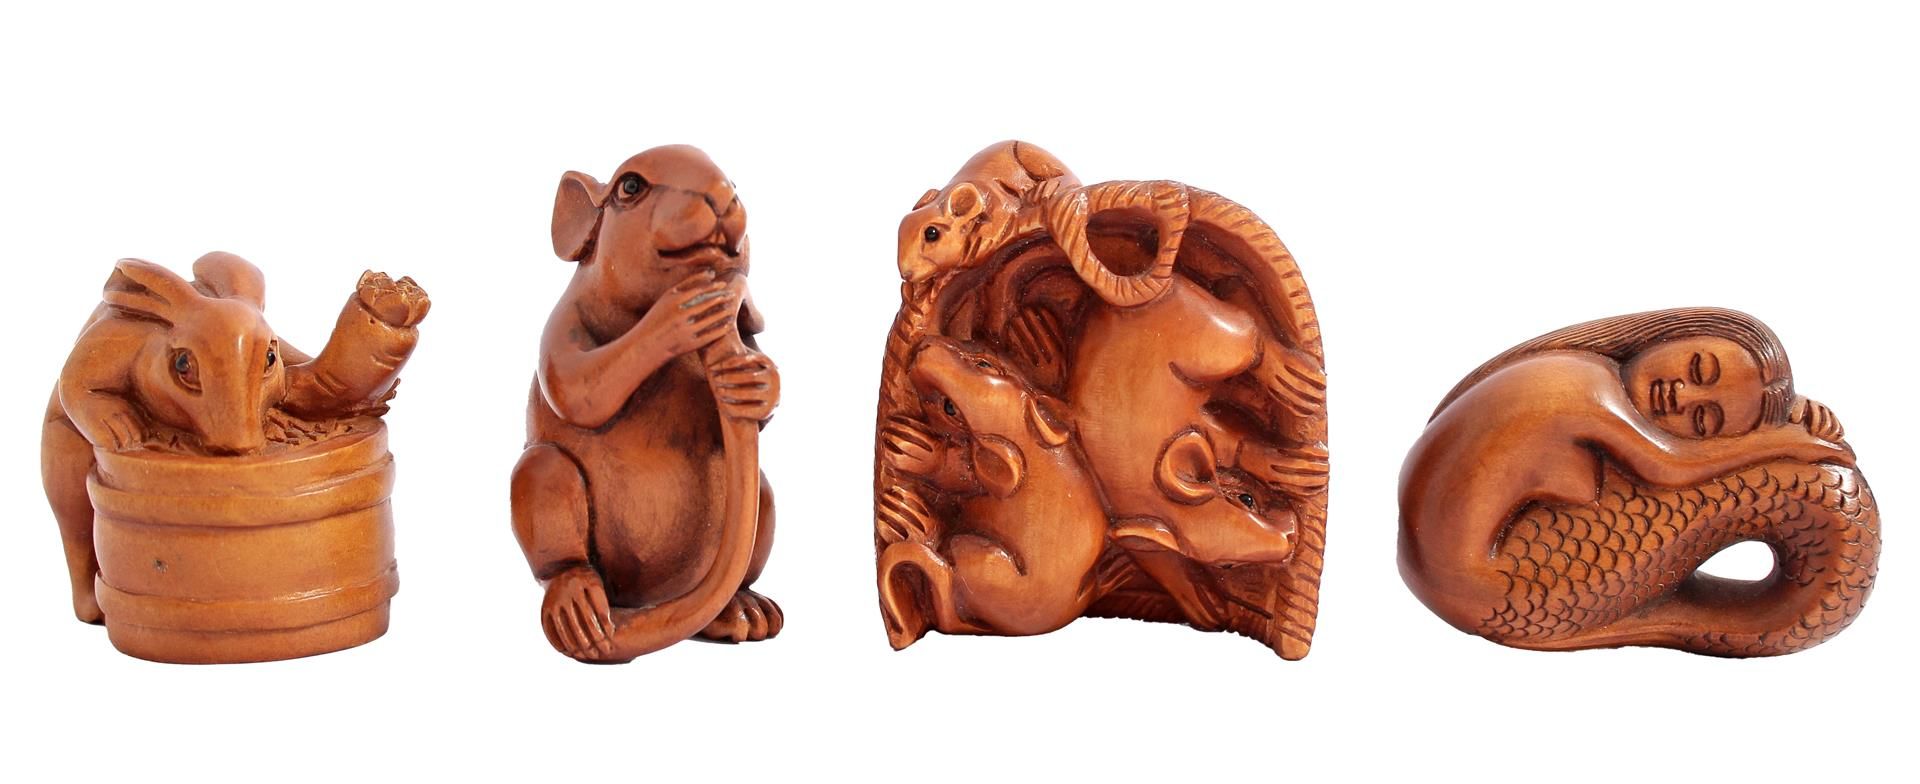 4 Oriental wooden netsuke's of mermaid, rabbit and mice 2 cm, 3.5 cm and 4.5 cm high